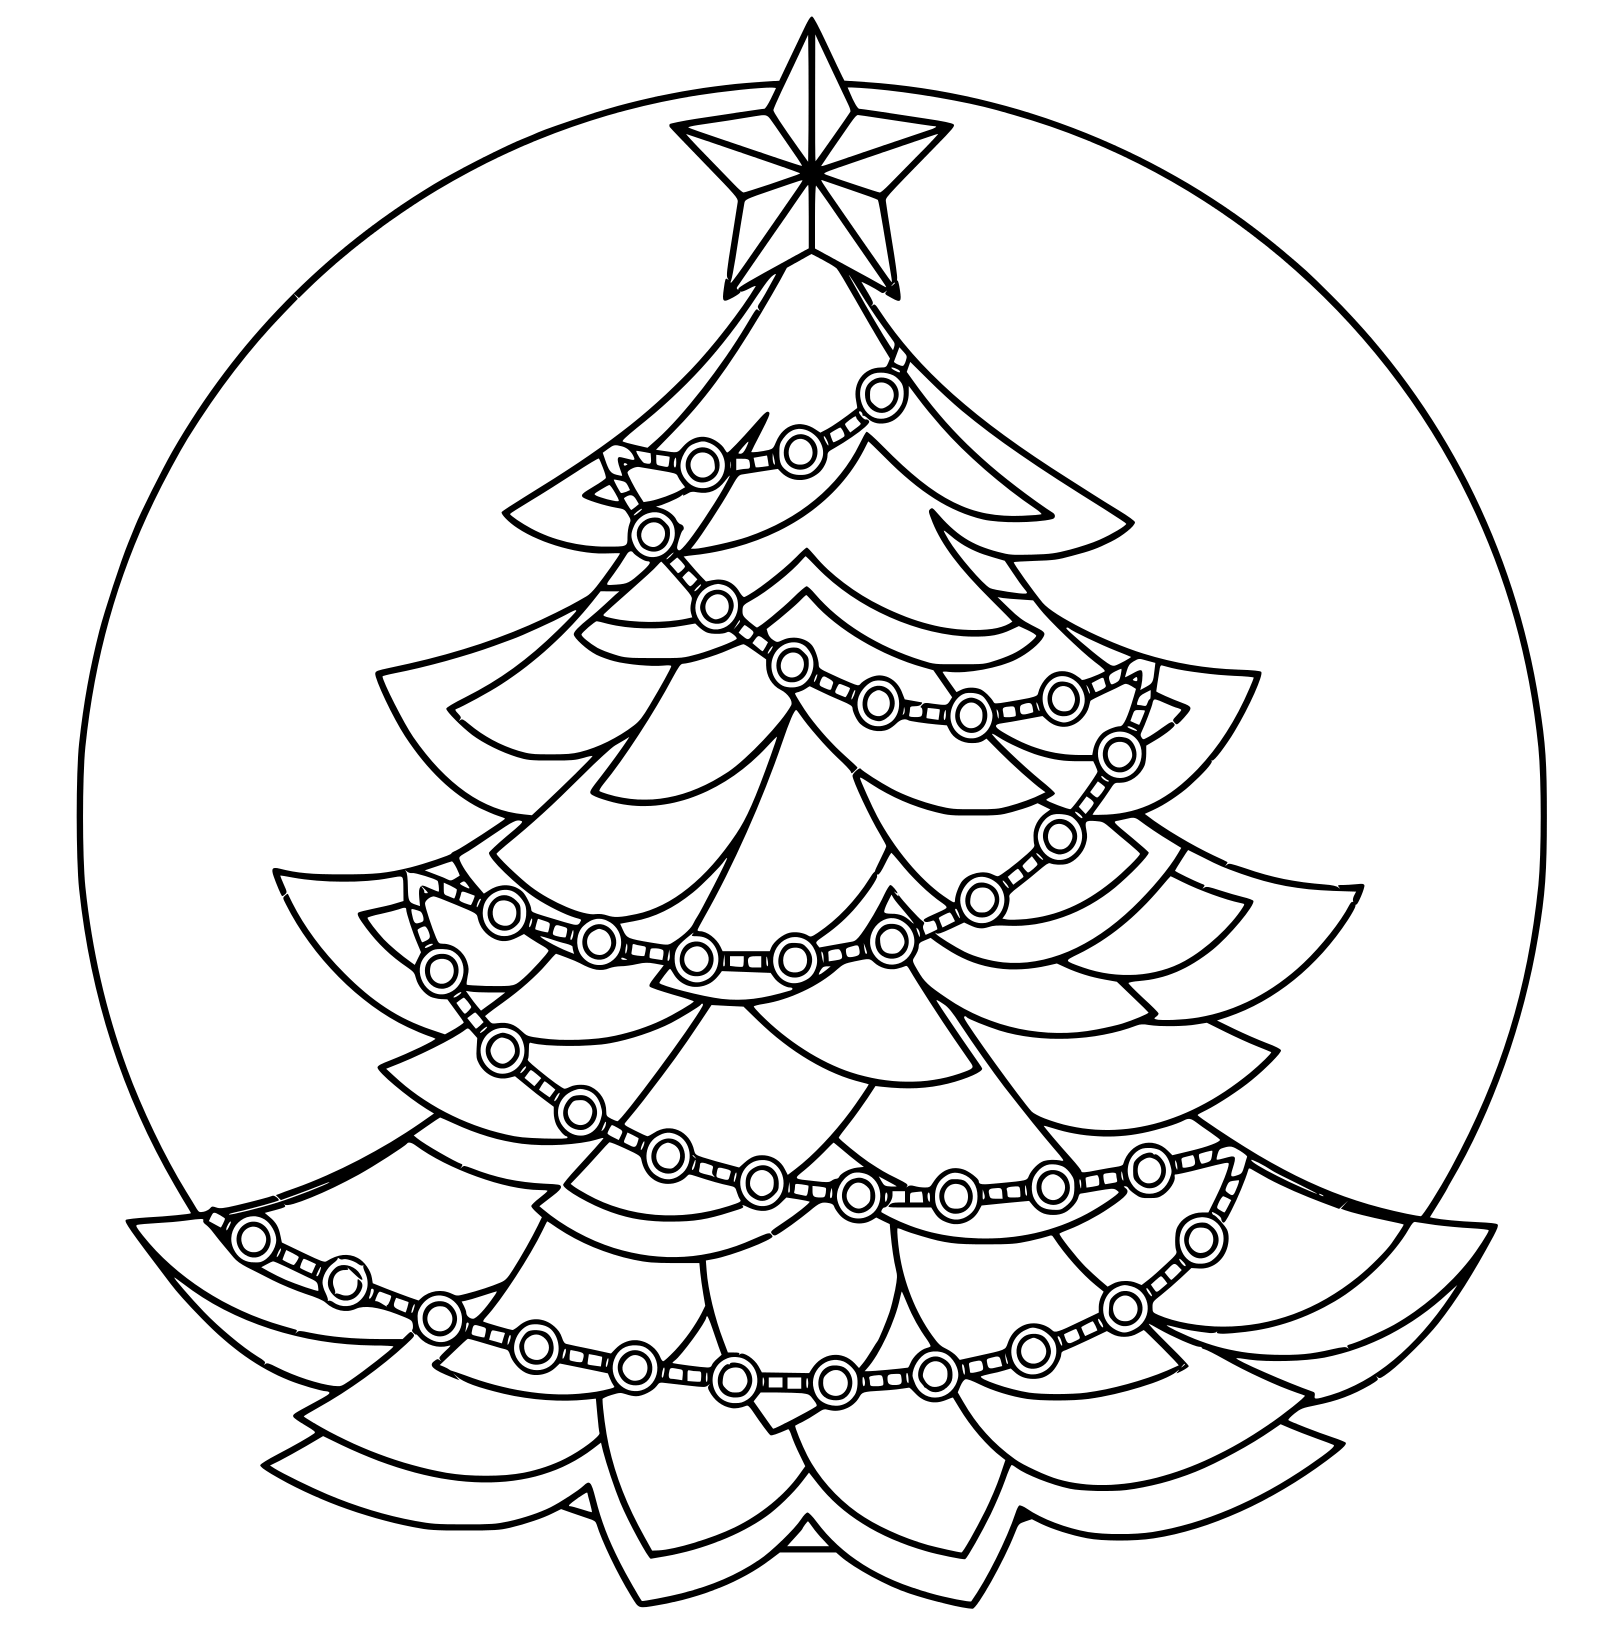 Black And White Christmas Tree Holiday Coloring Page